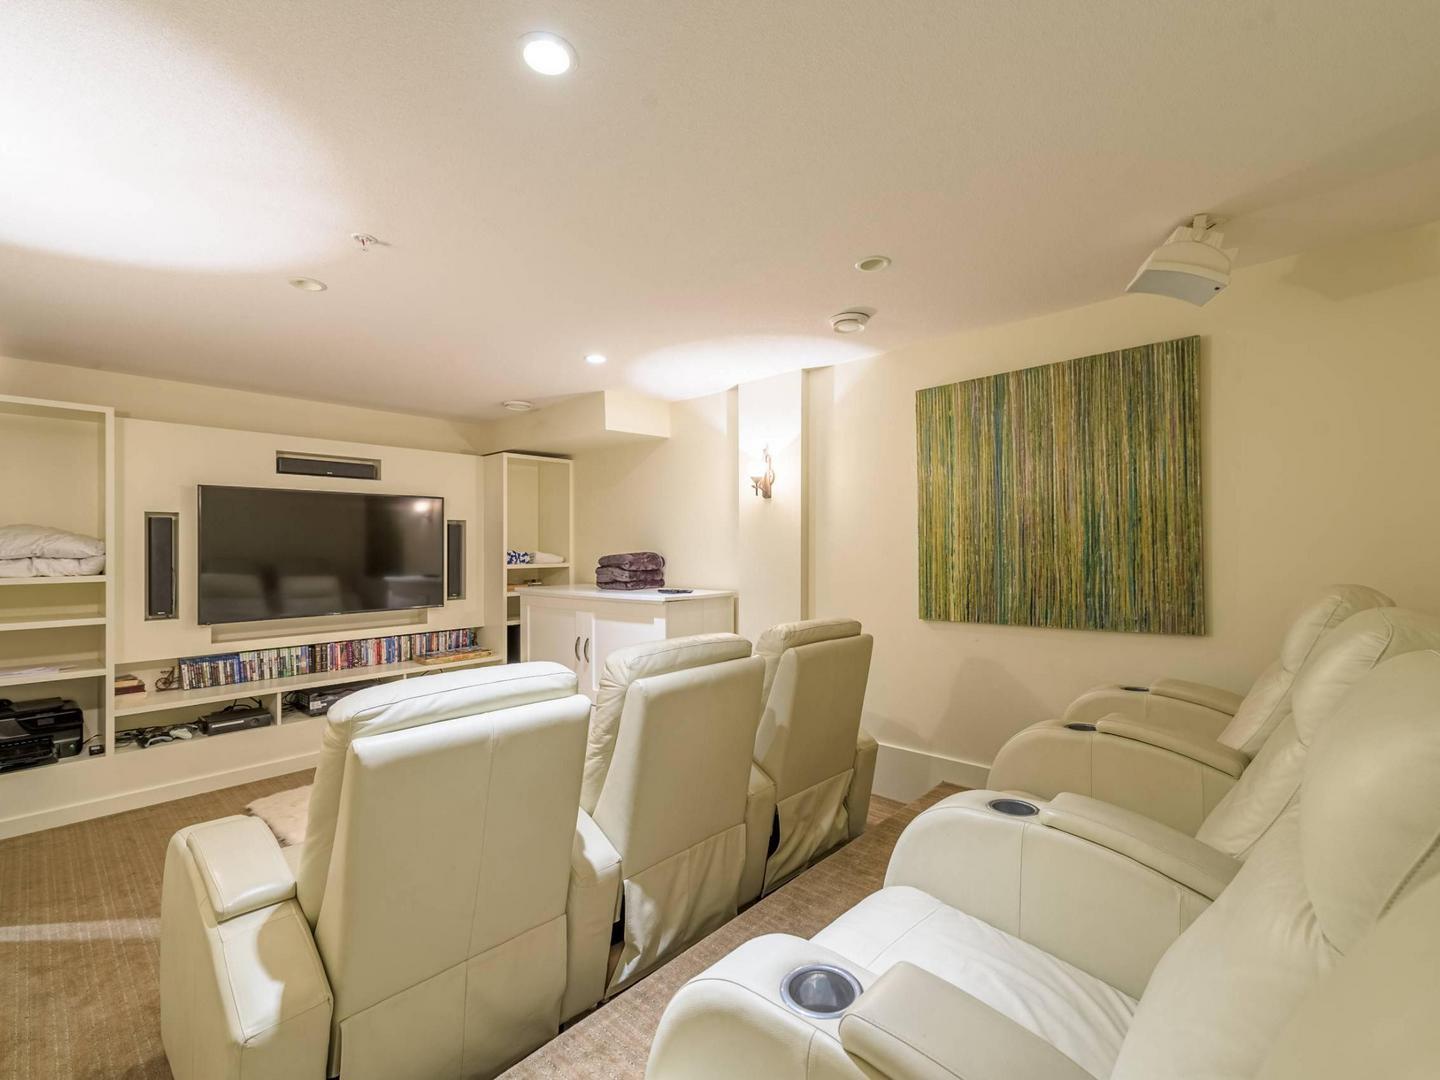 The private home theatre with white leather chairs and a large TV in the Edge 7.